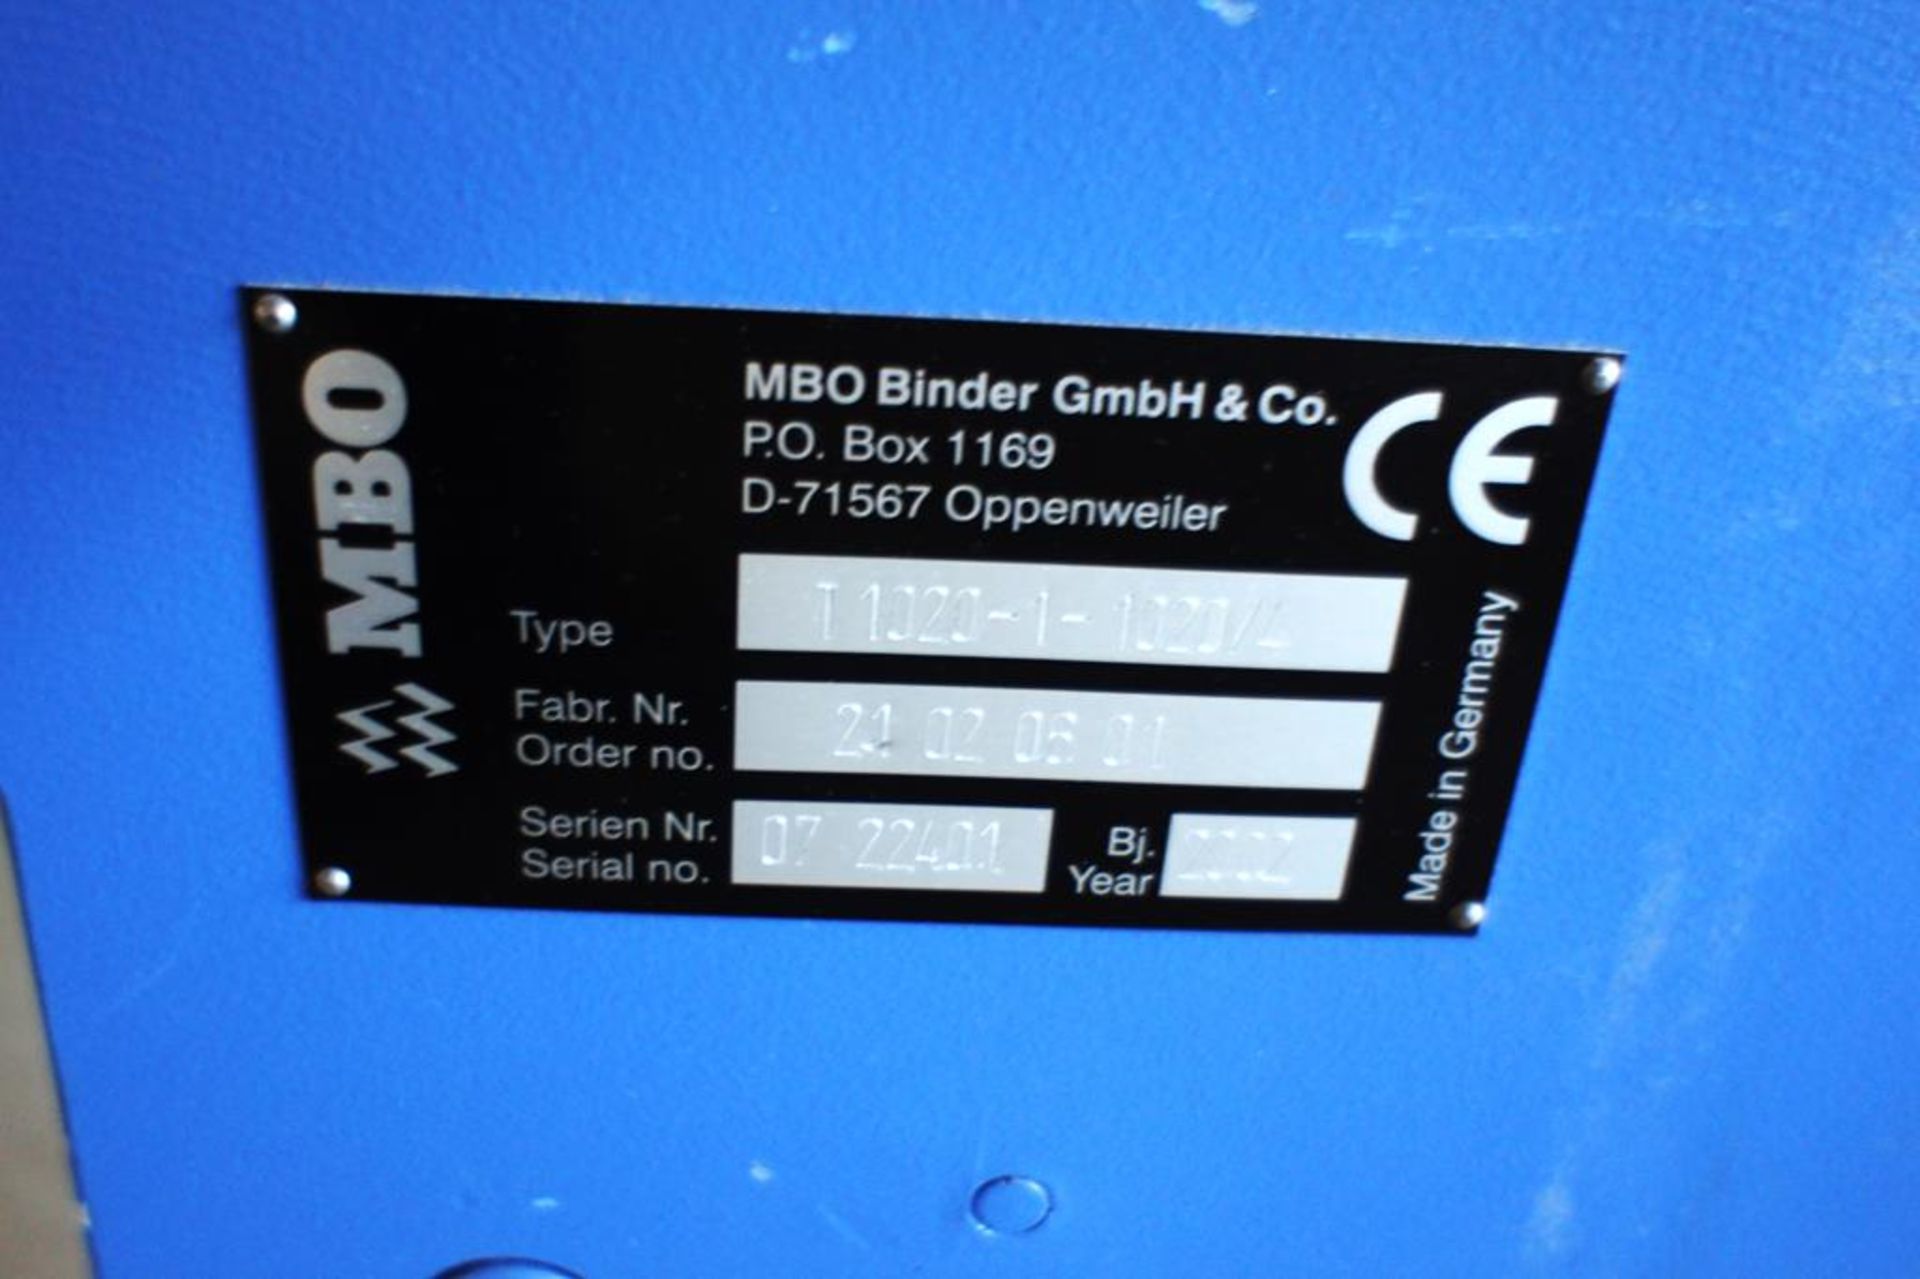 * MBO Perfection type T1020-1-1020/4 folder, fabrication no. 21.02.06.01, serial number 07 22401 ( - Image 35 of 92